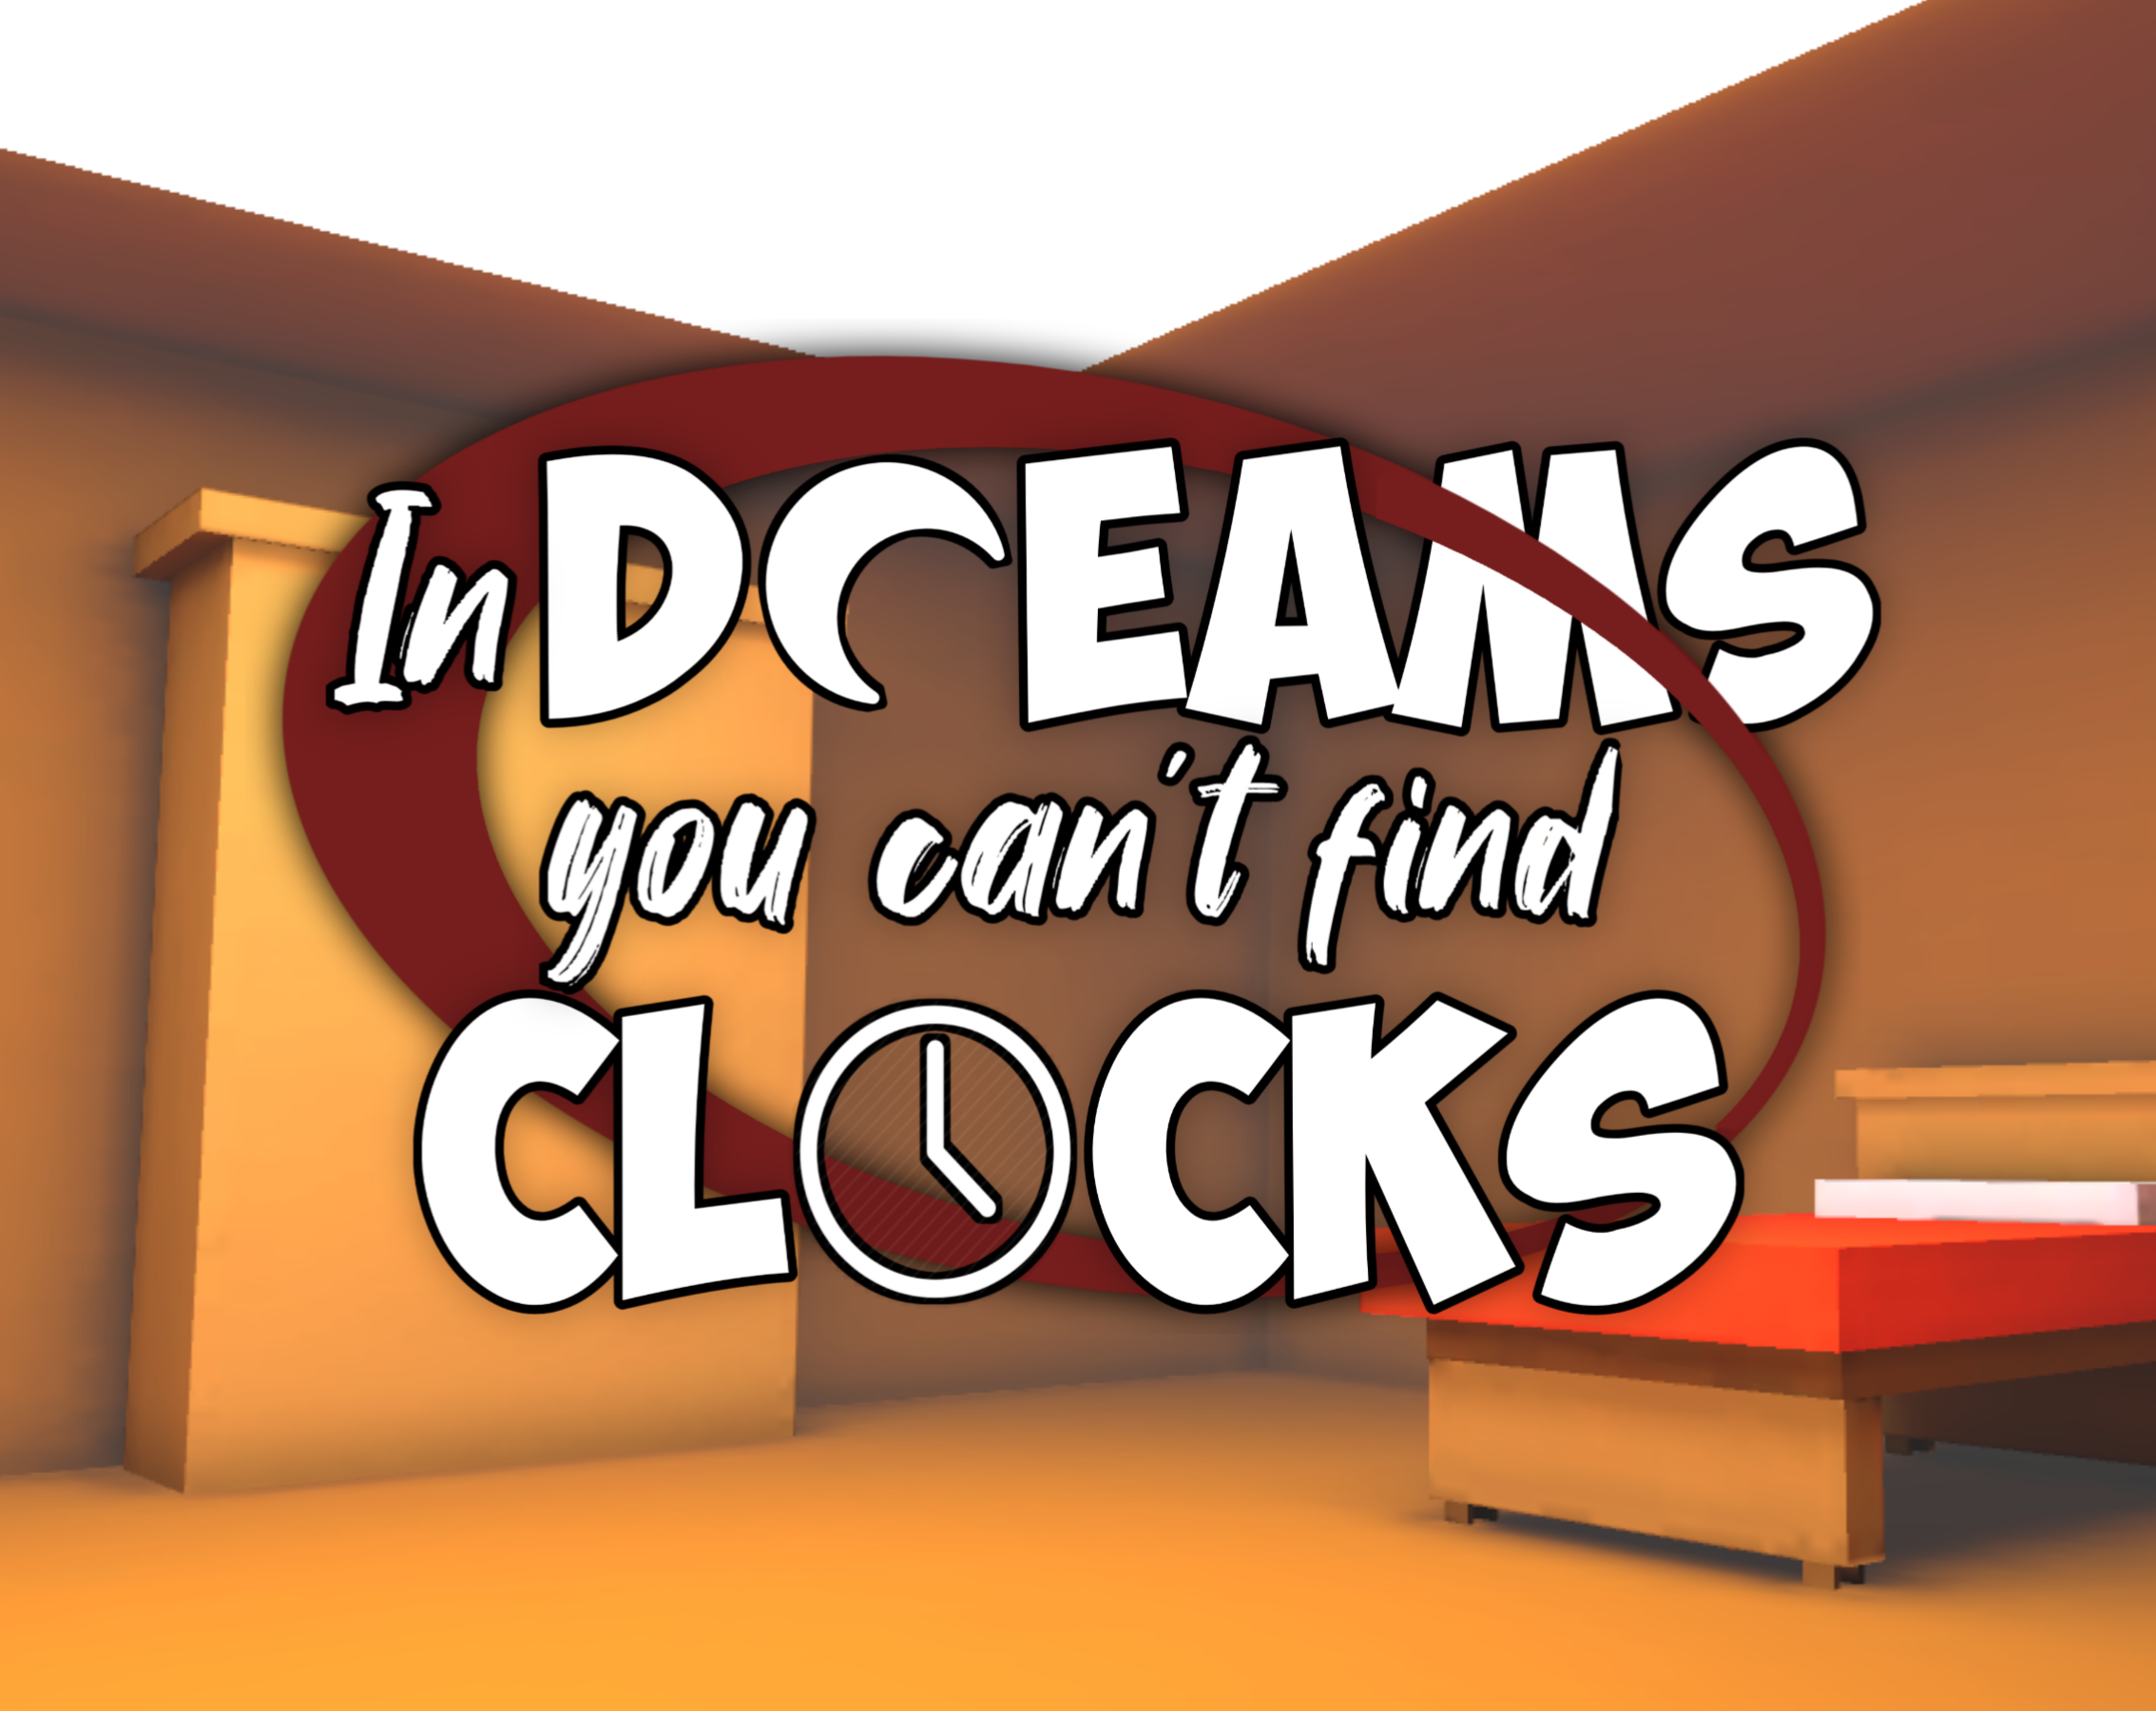 In Dreams You Can't Find Clocks (ld47) Image